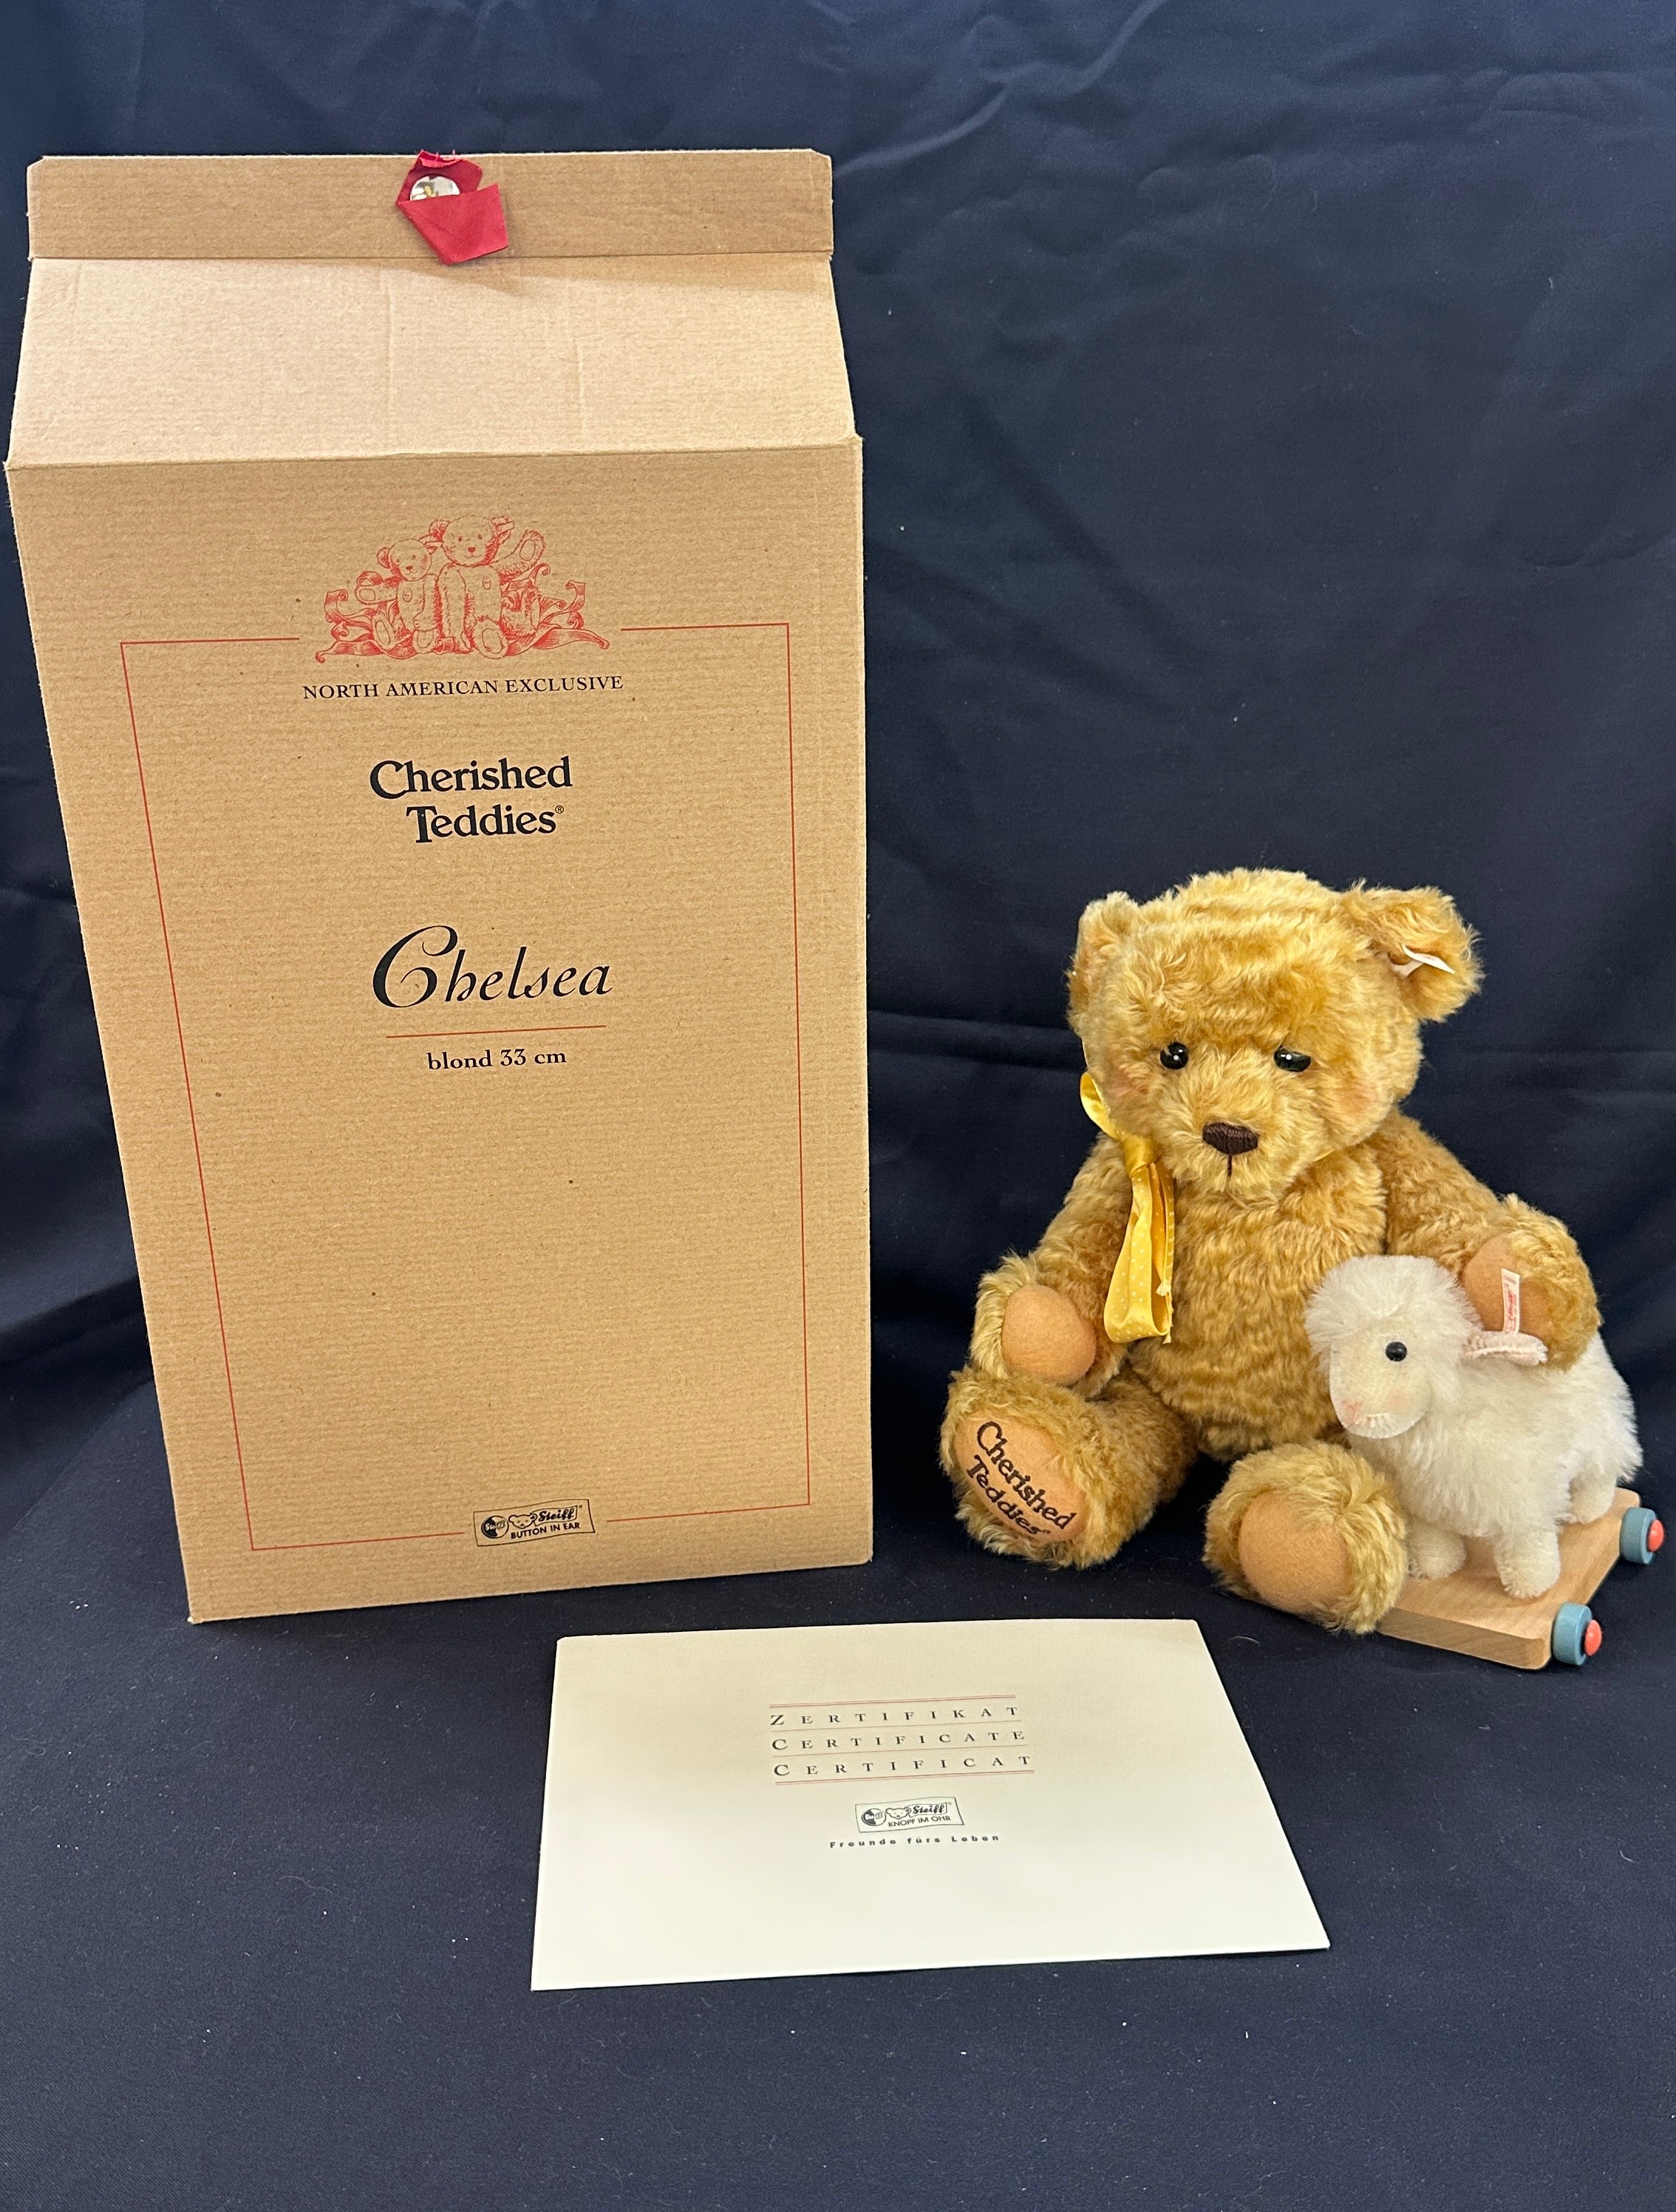 Boxed limited edition Steiff chelsea bear blond 33cm with COA